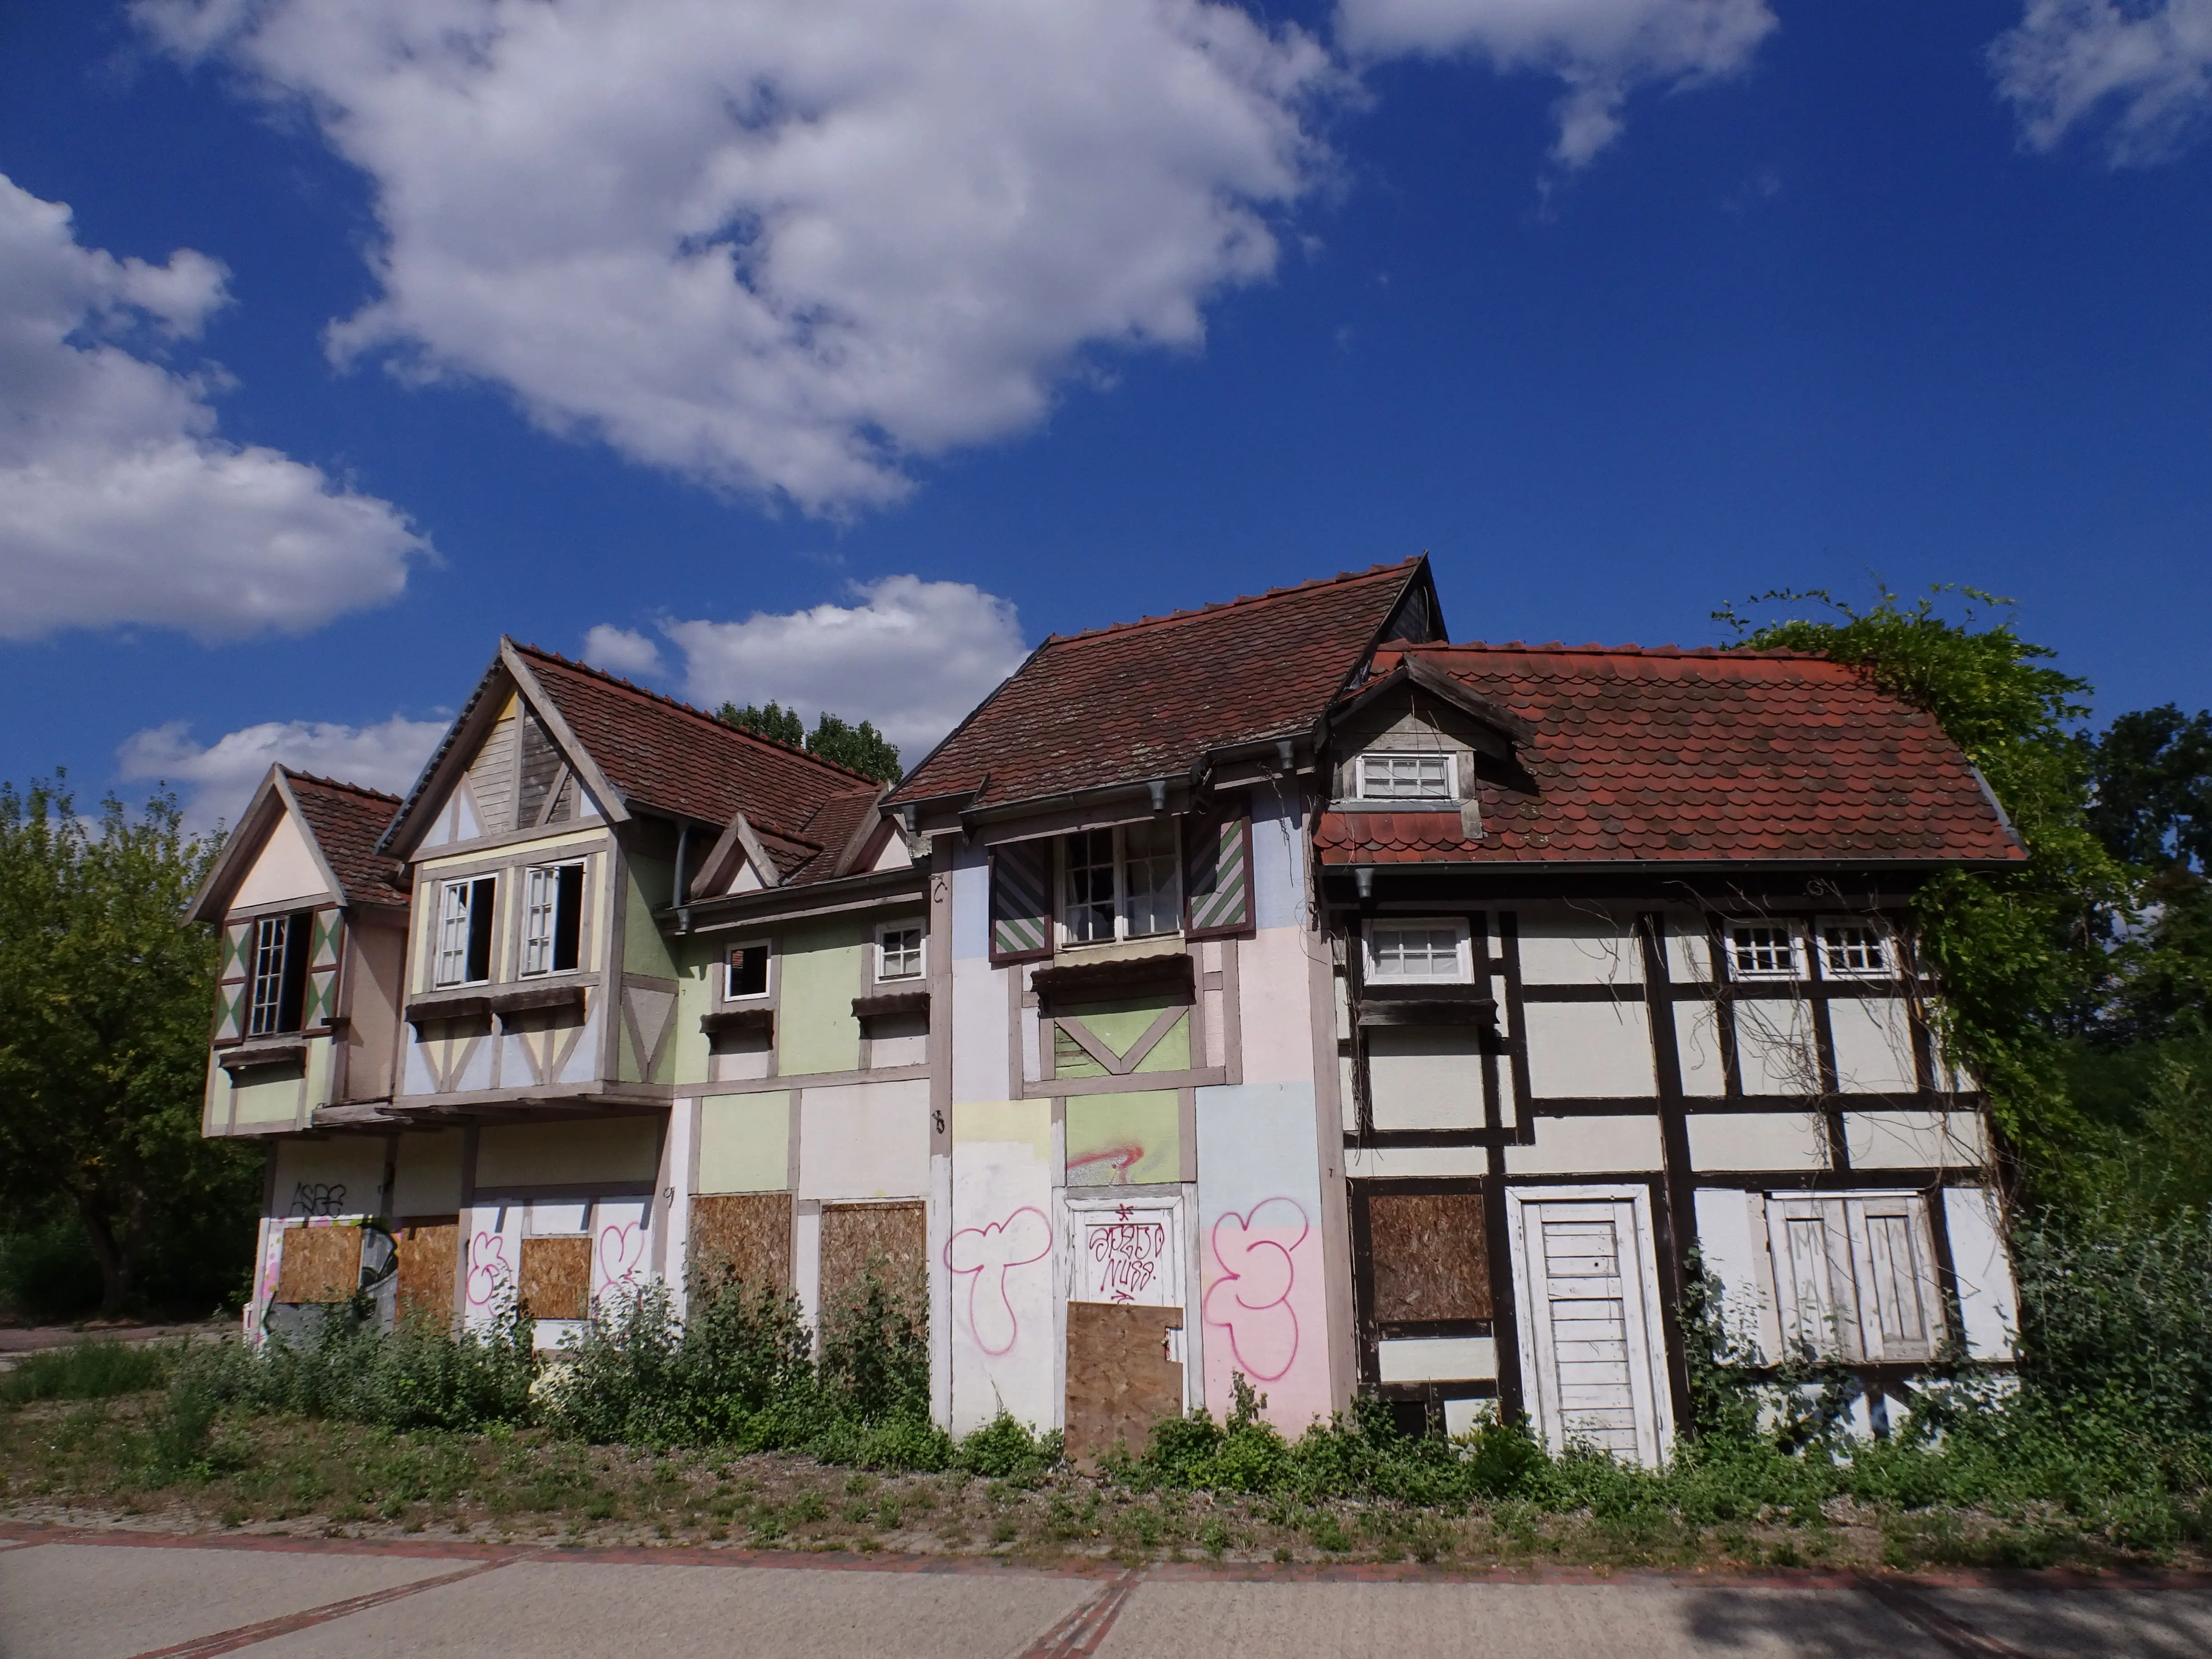 A small selection of dilapidated tudor style buildings